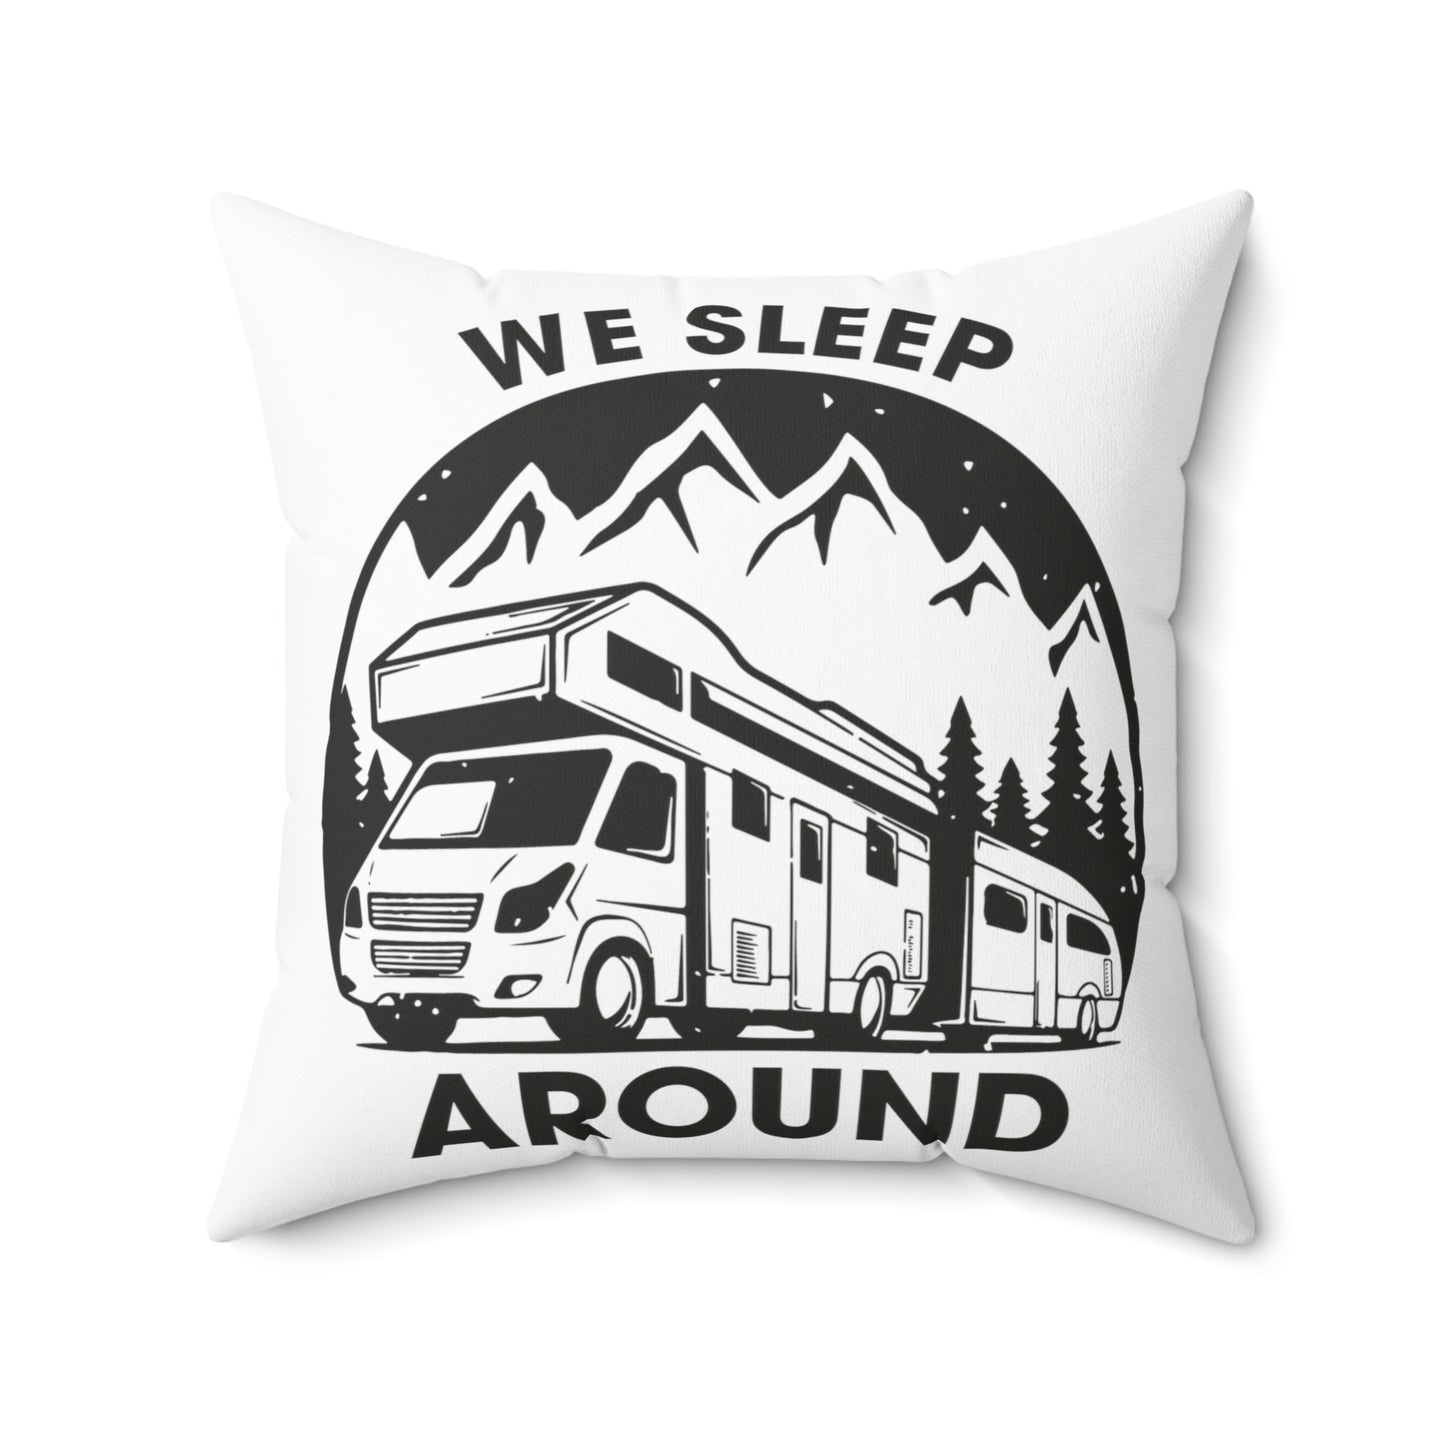 "We Sleep Around" Camping Throw Pillow - Weave Got Gifts - Unique Gifts You Won’t Find Anywhere Else!